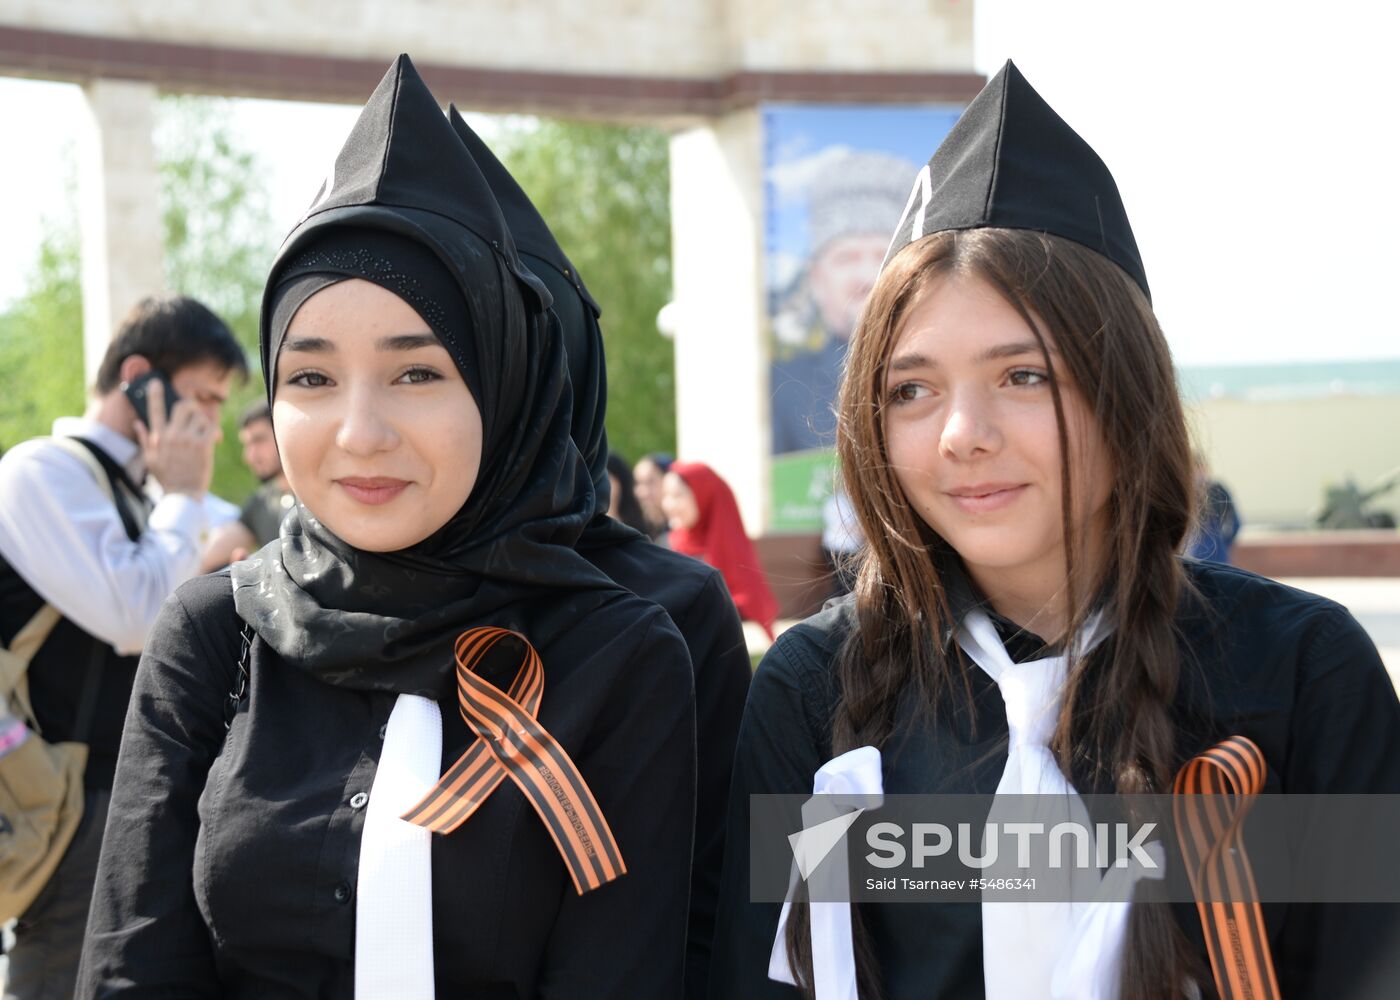 St. George Ribbon event in Grozny